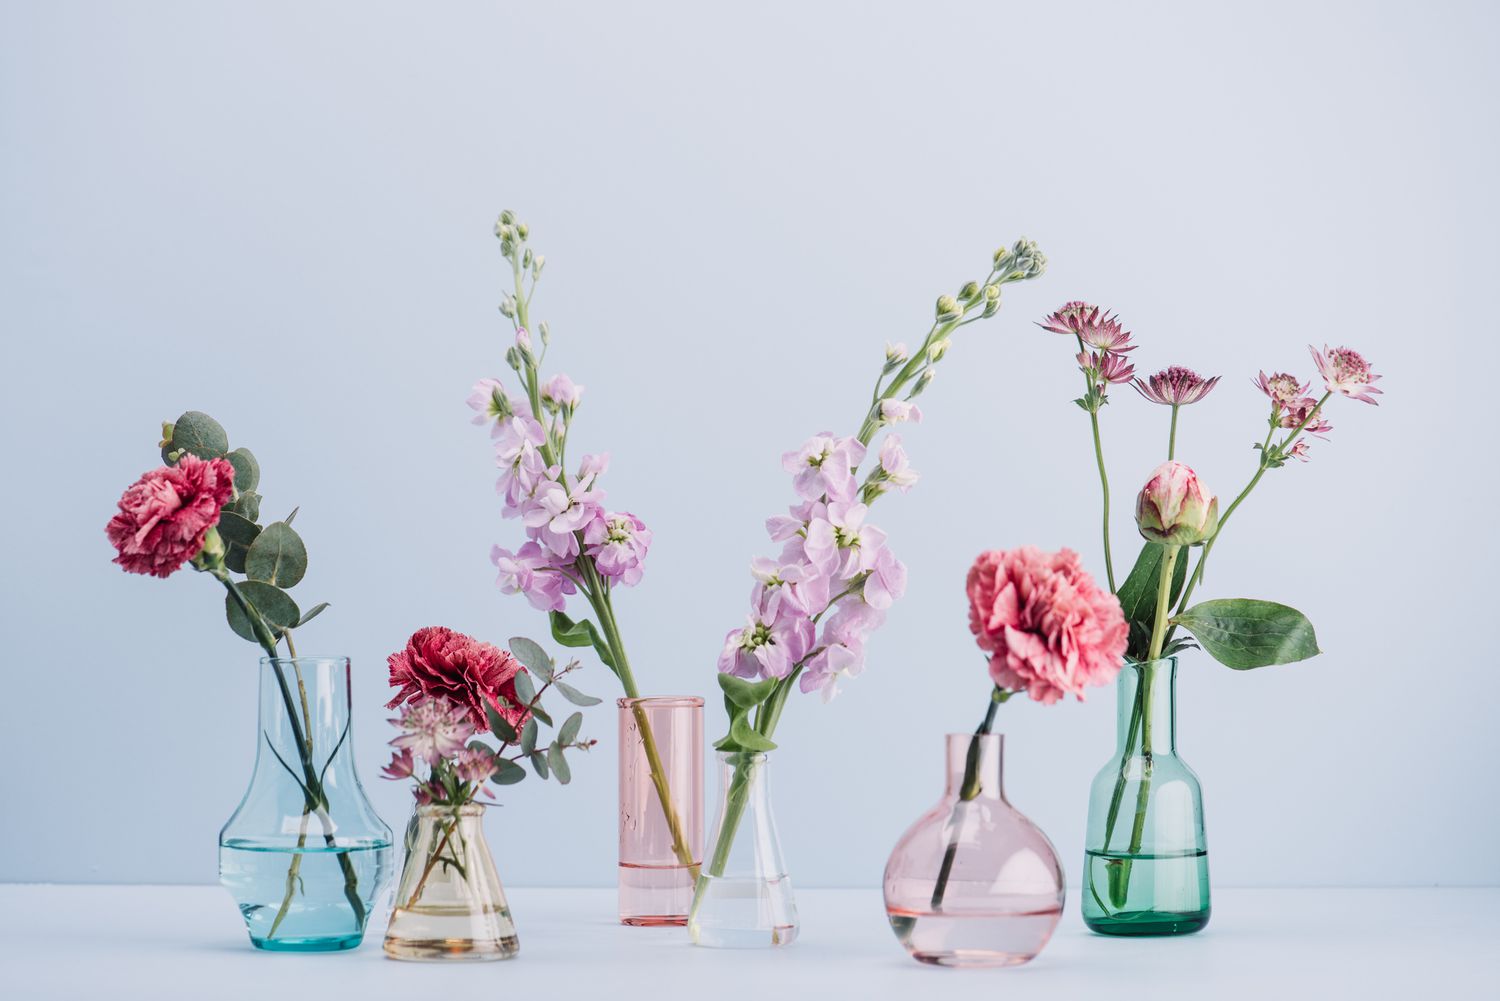 a row of various size and coor glass vases with flowers